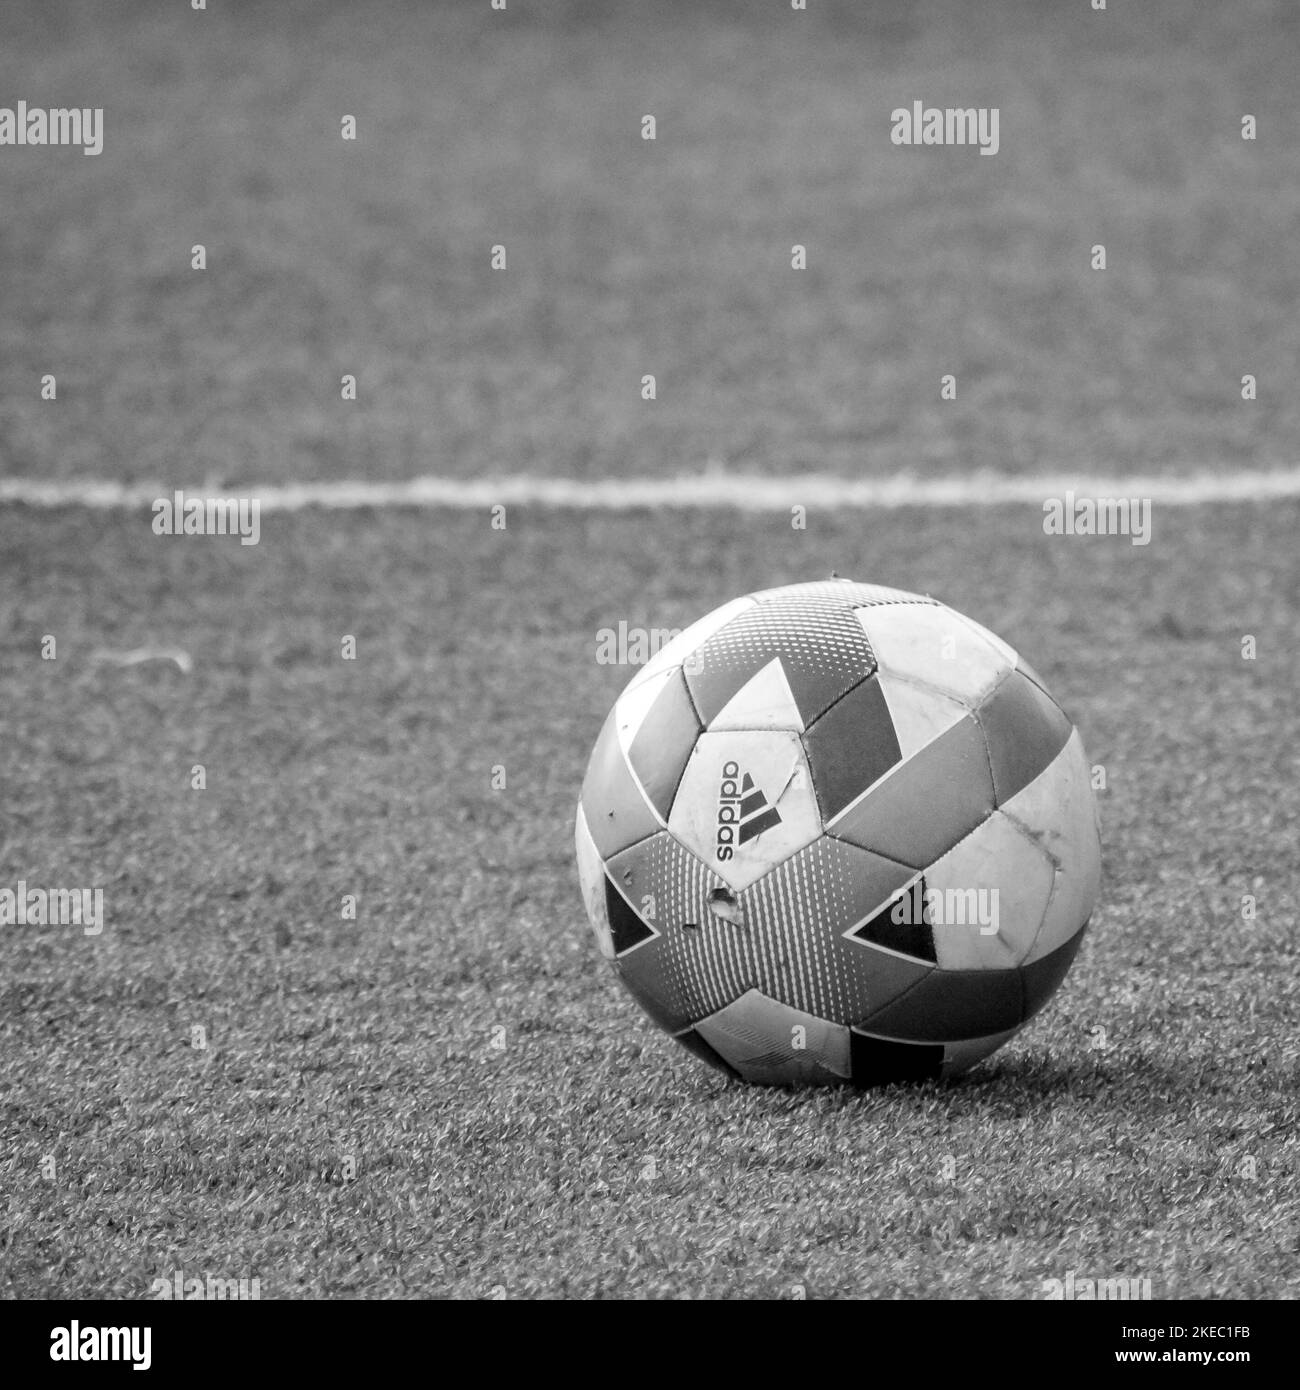 New Delhi, India - July 01 2018: The official adidas football during the championship League, Adidas football in the middle of fields Stock Photo